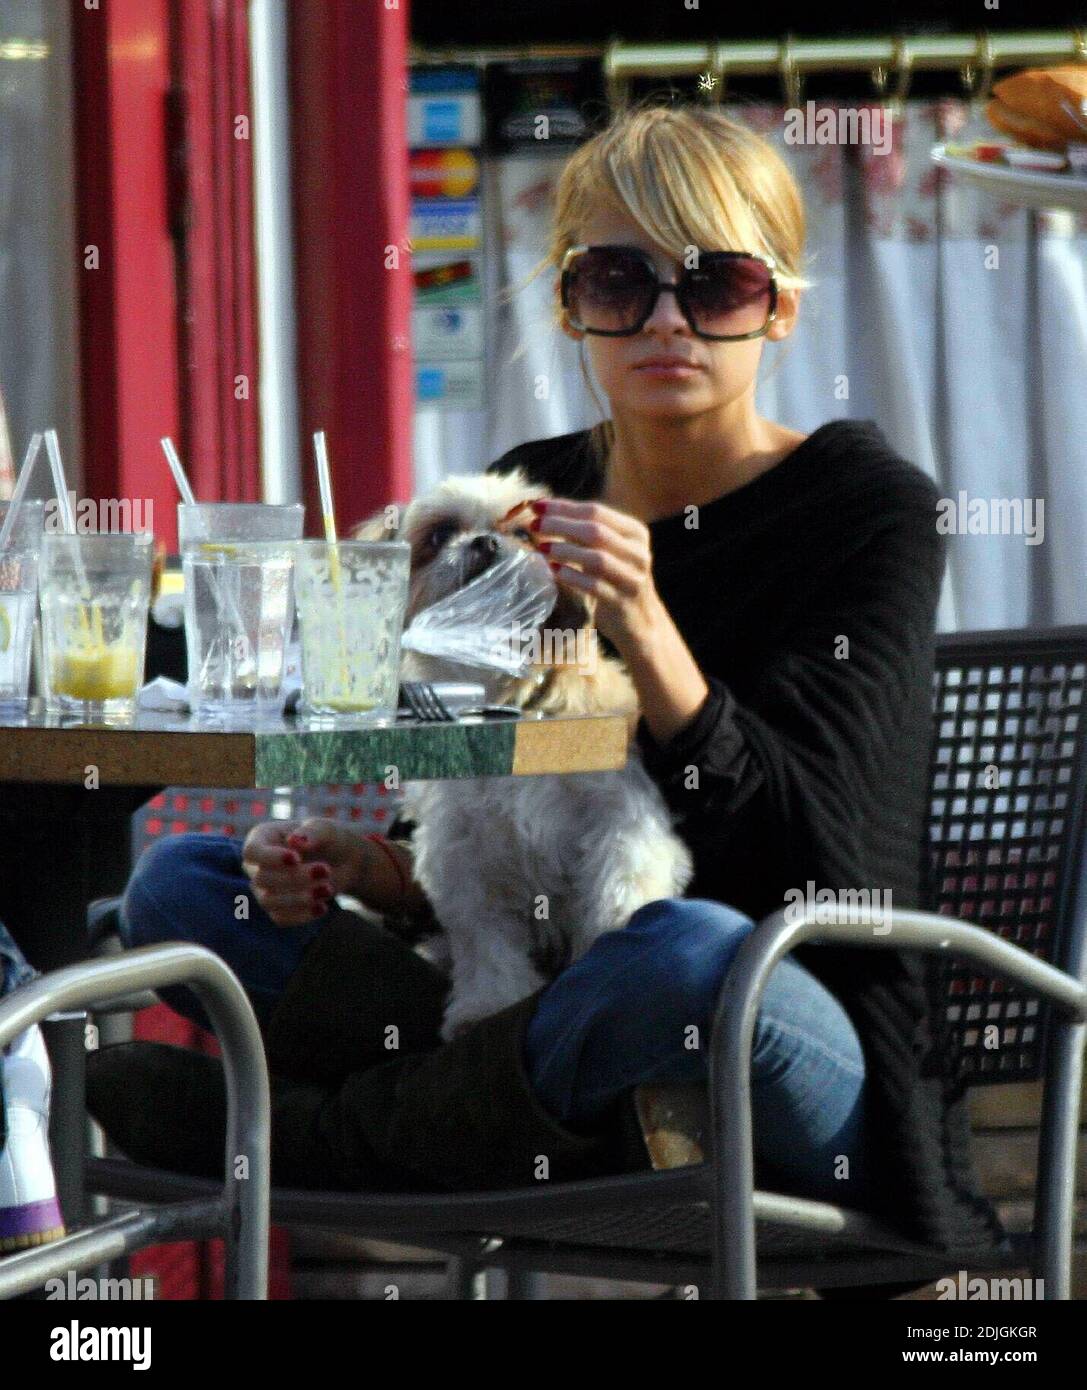 Exclusive!! Nicole Richie takes her two dogs Foxy Cleopatra and Honey Child along for lunch with her friends at La Conversacion in Beverly Hills, Ca. Richie spent most of the meal fussing over her two pooches, petting and feeding them. 1/29/06 Stock Photo